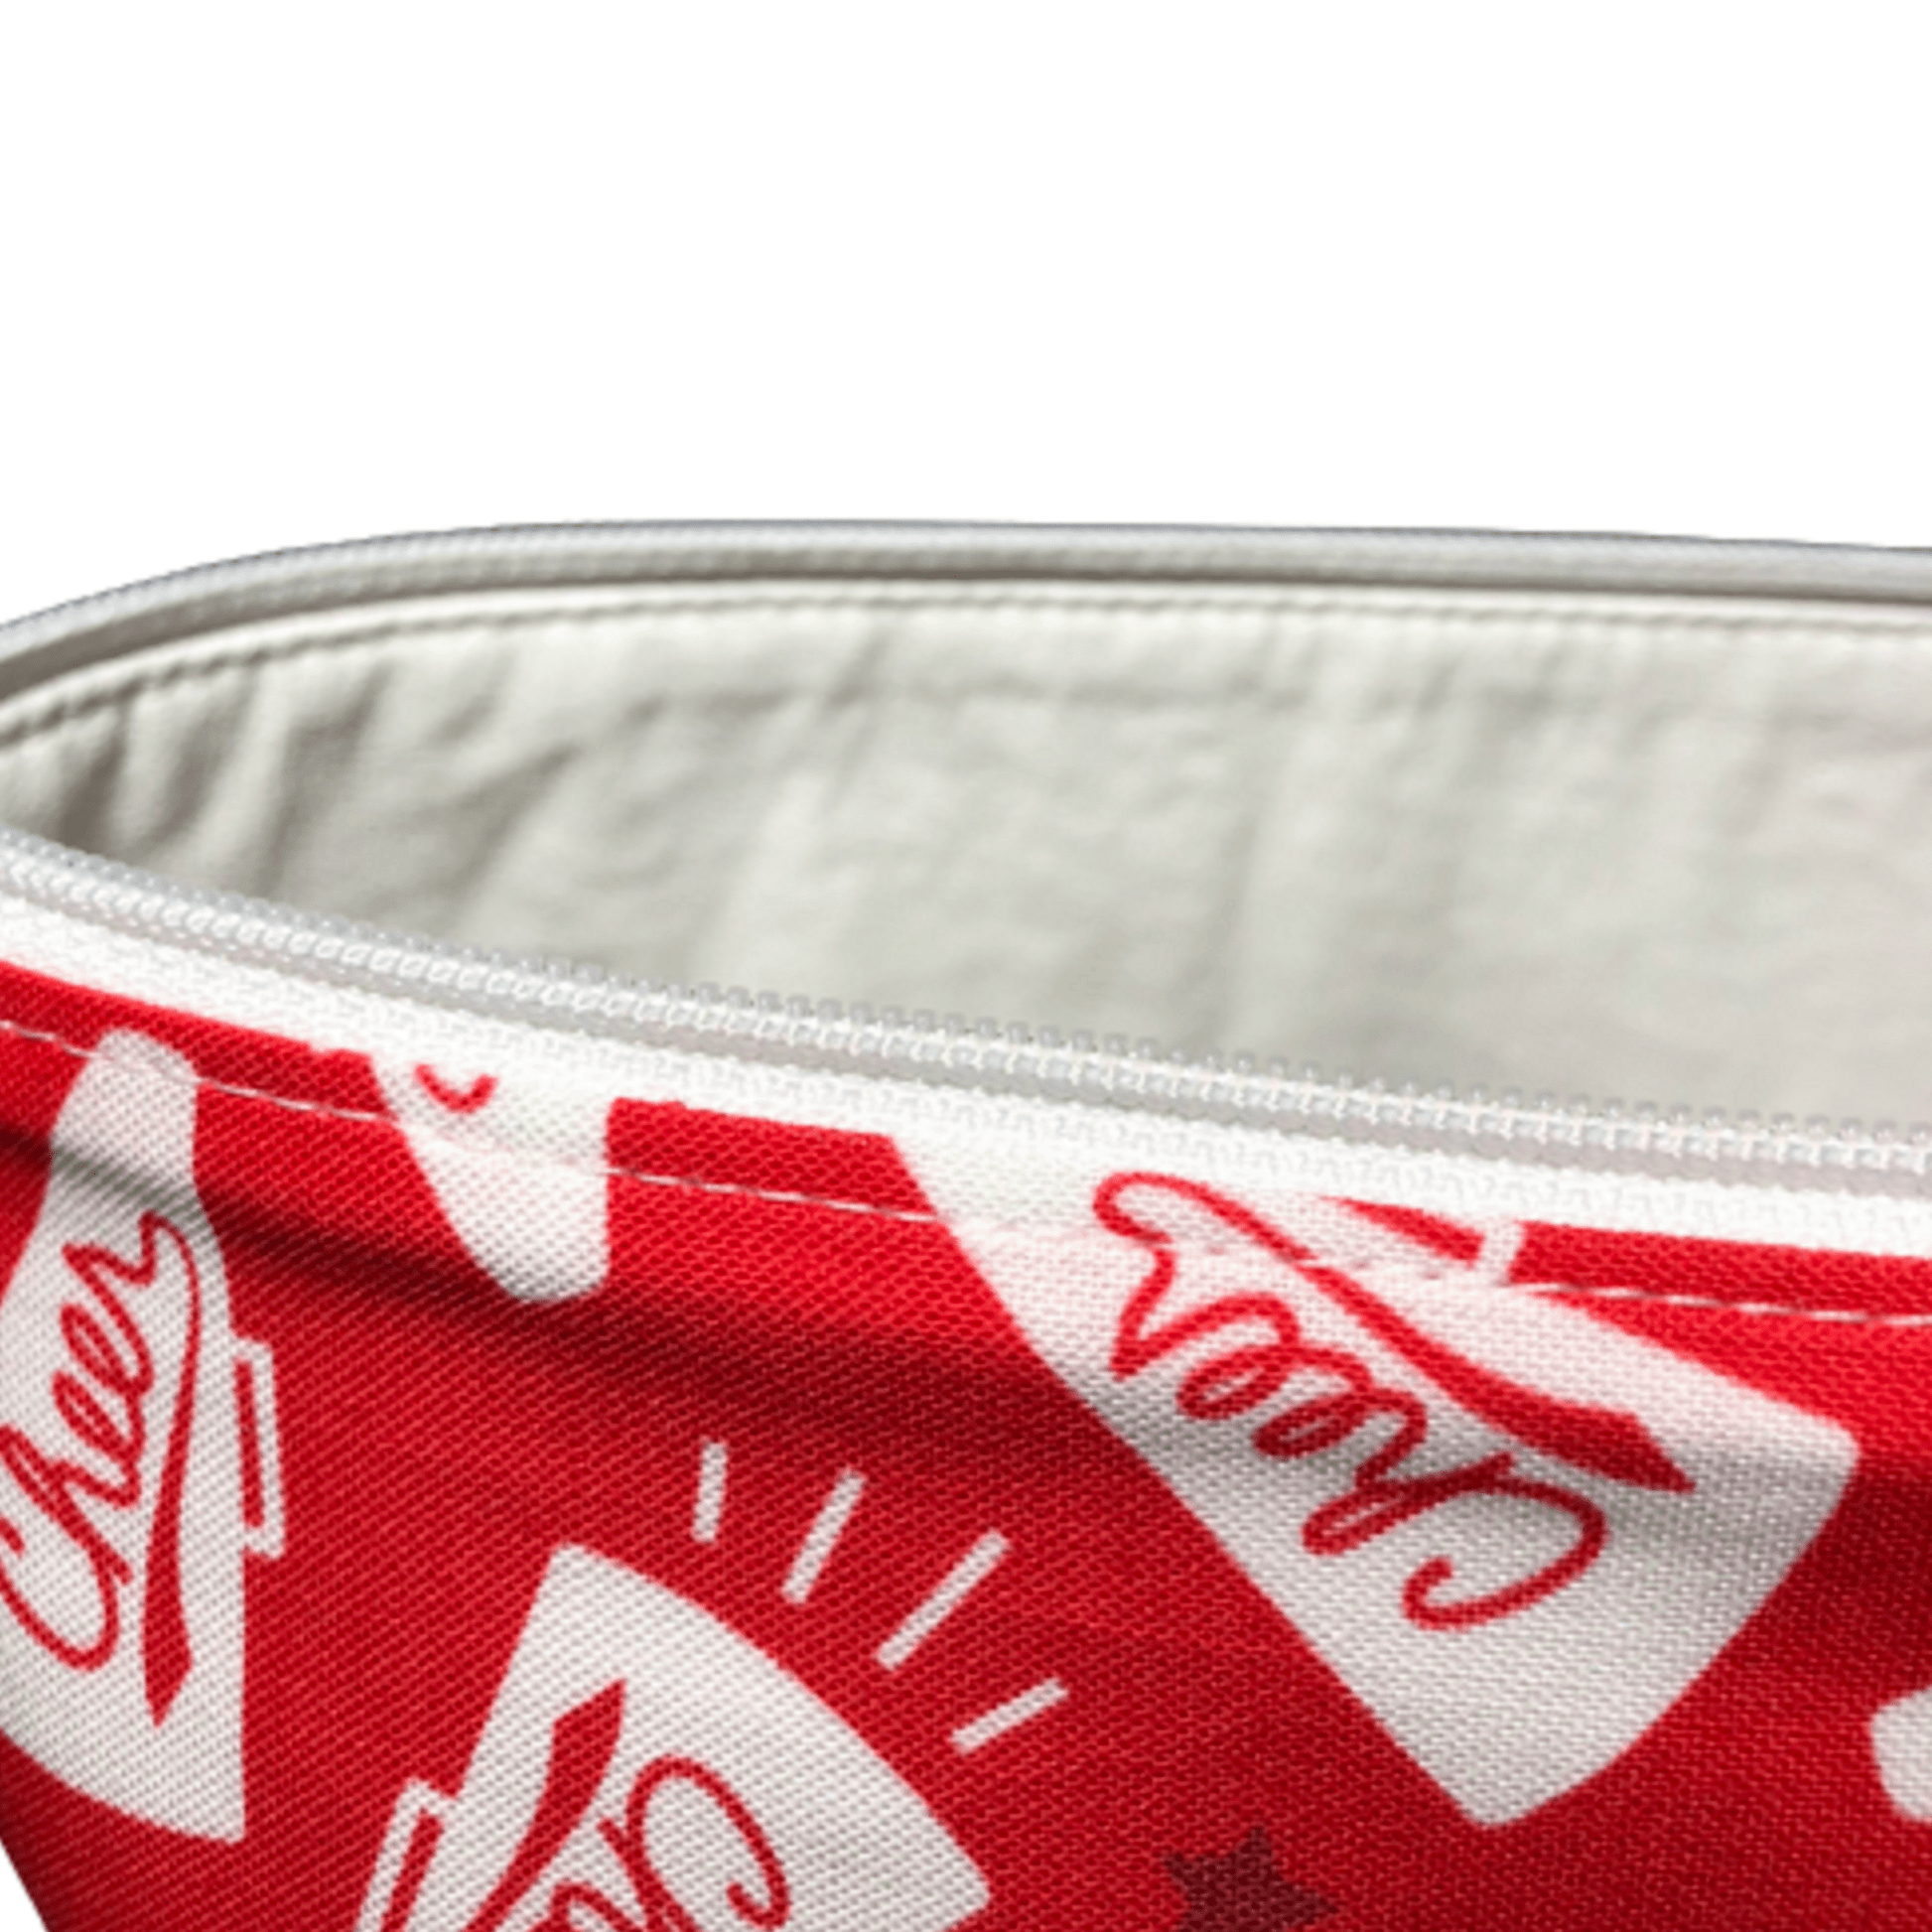 white vinyl lining and white zipper on red cheer cosmetic bag